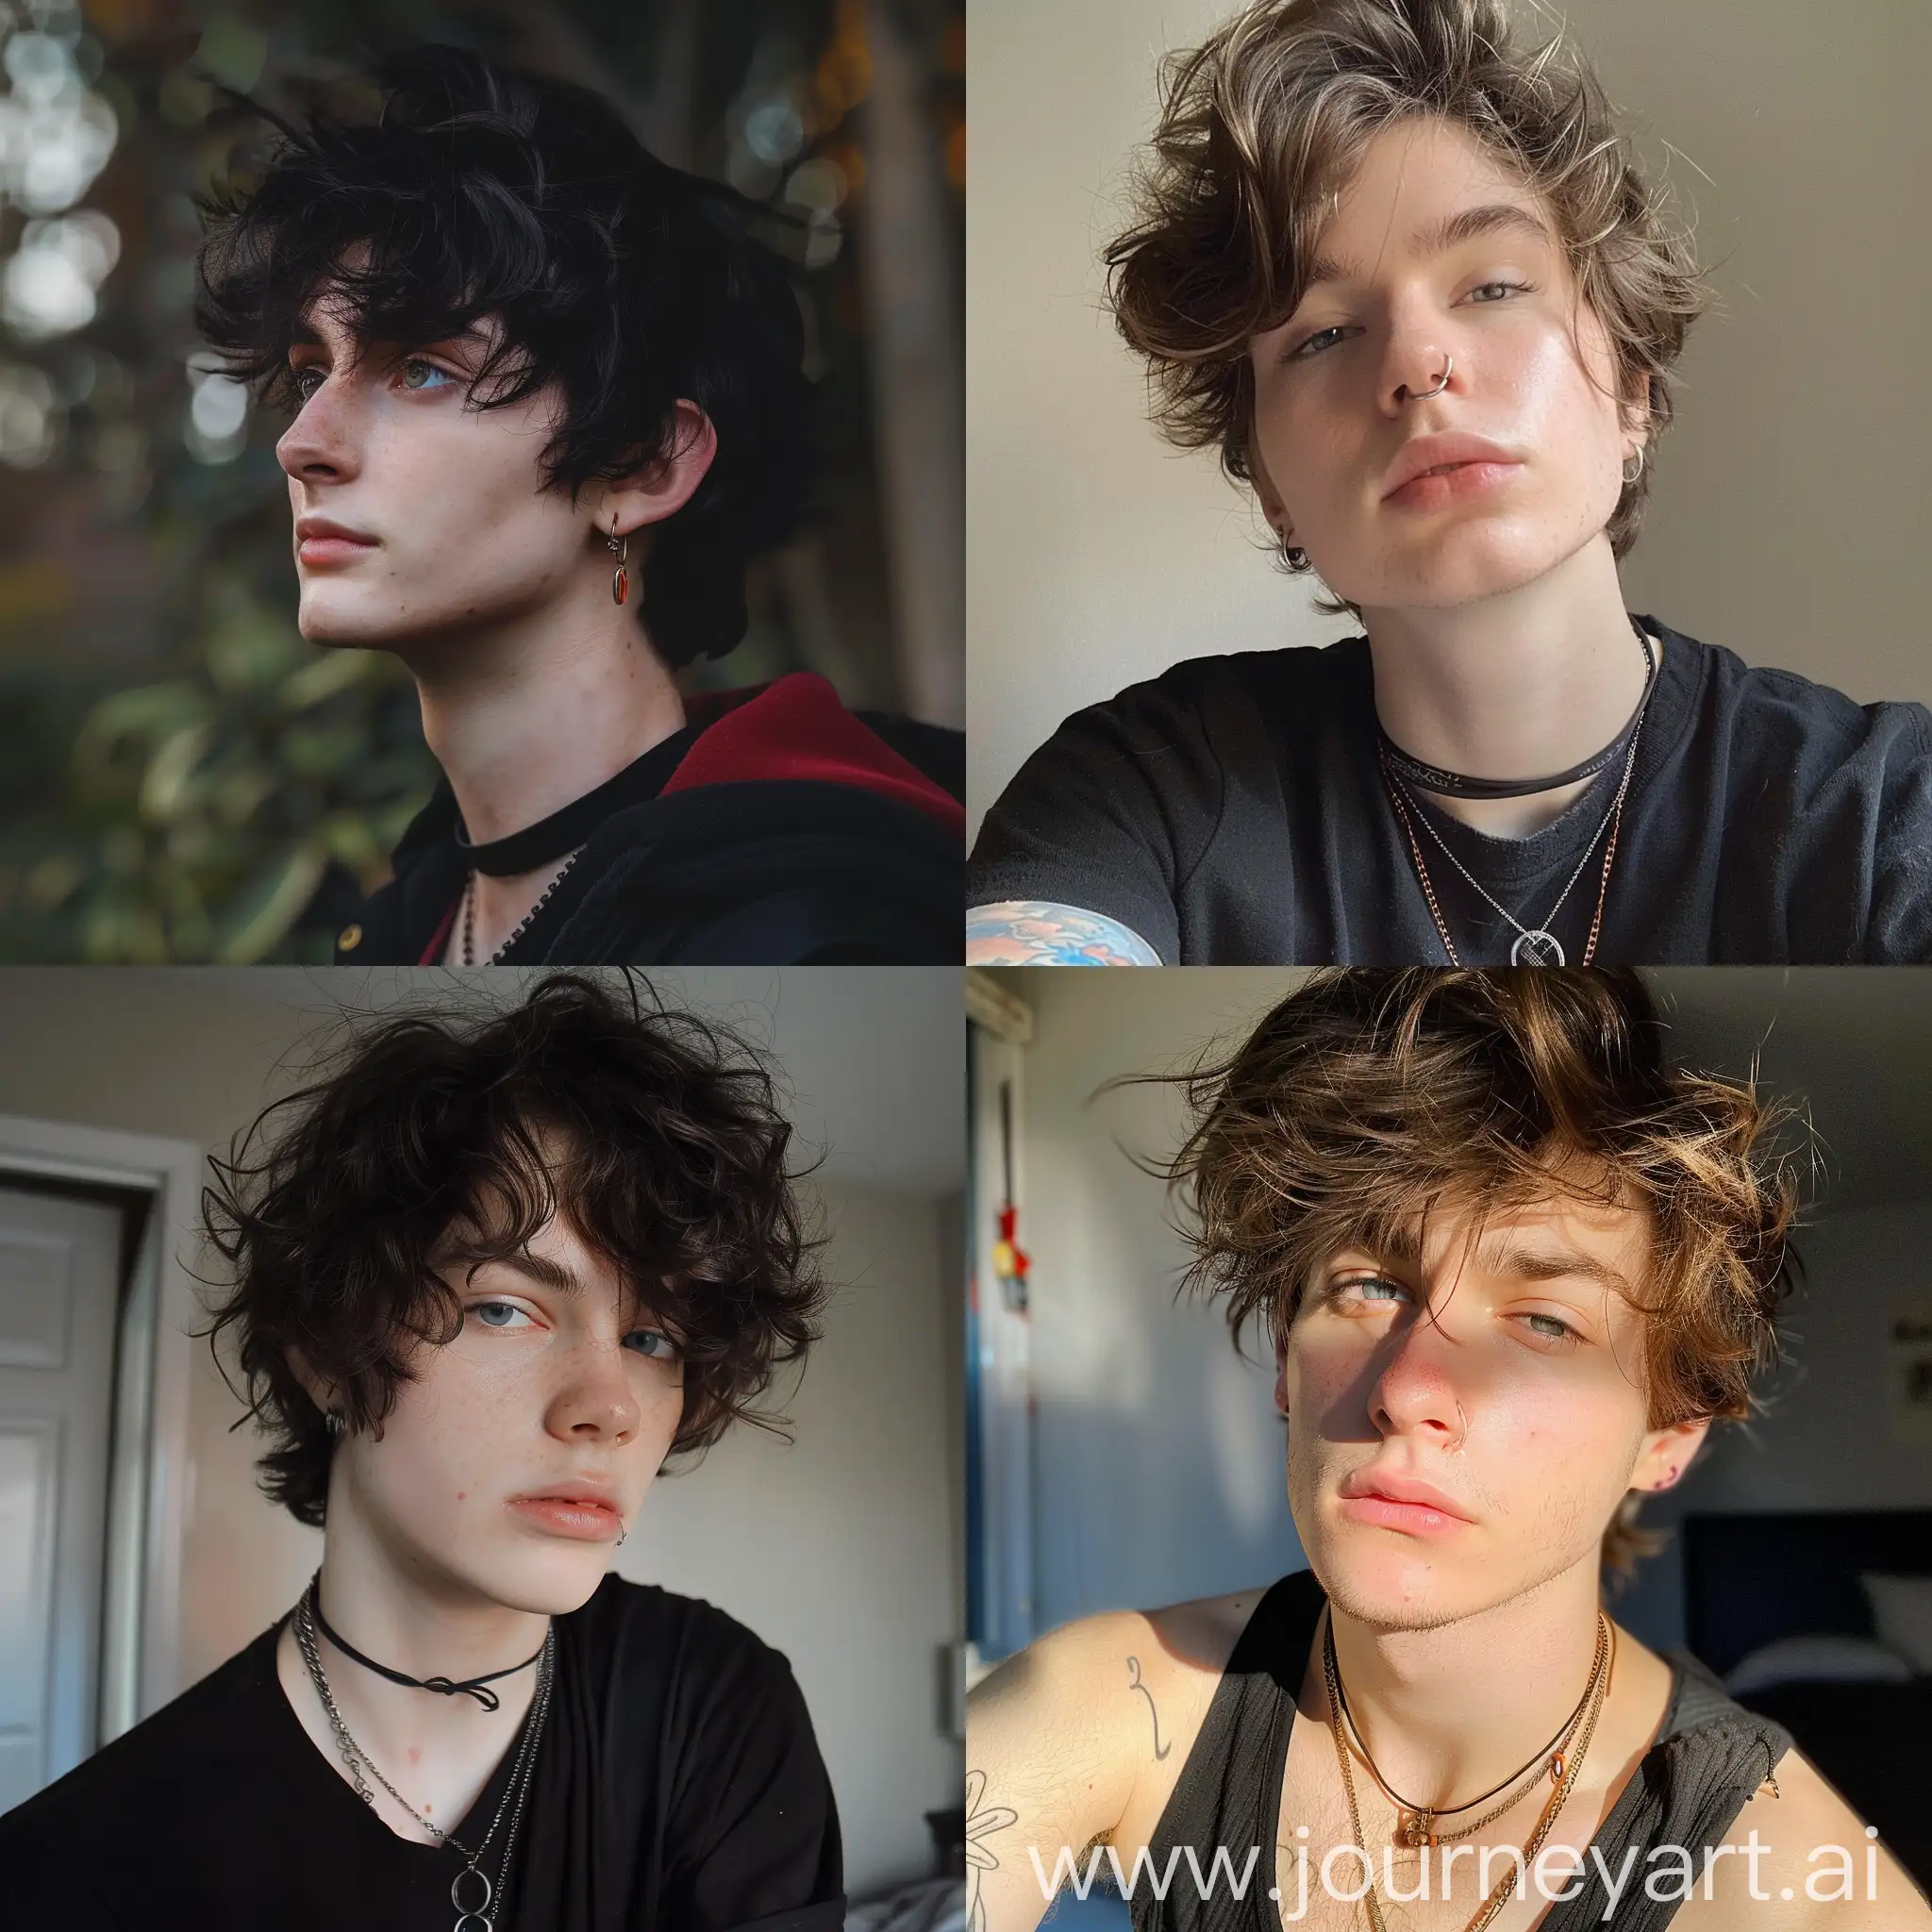 Elixir as a young male in their early 20s